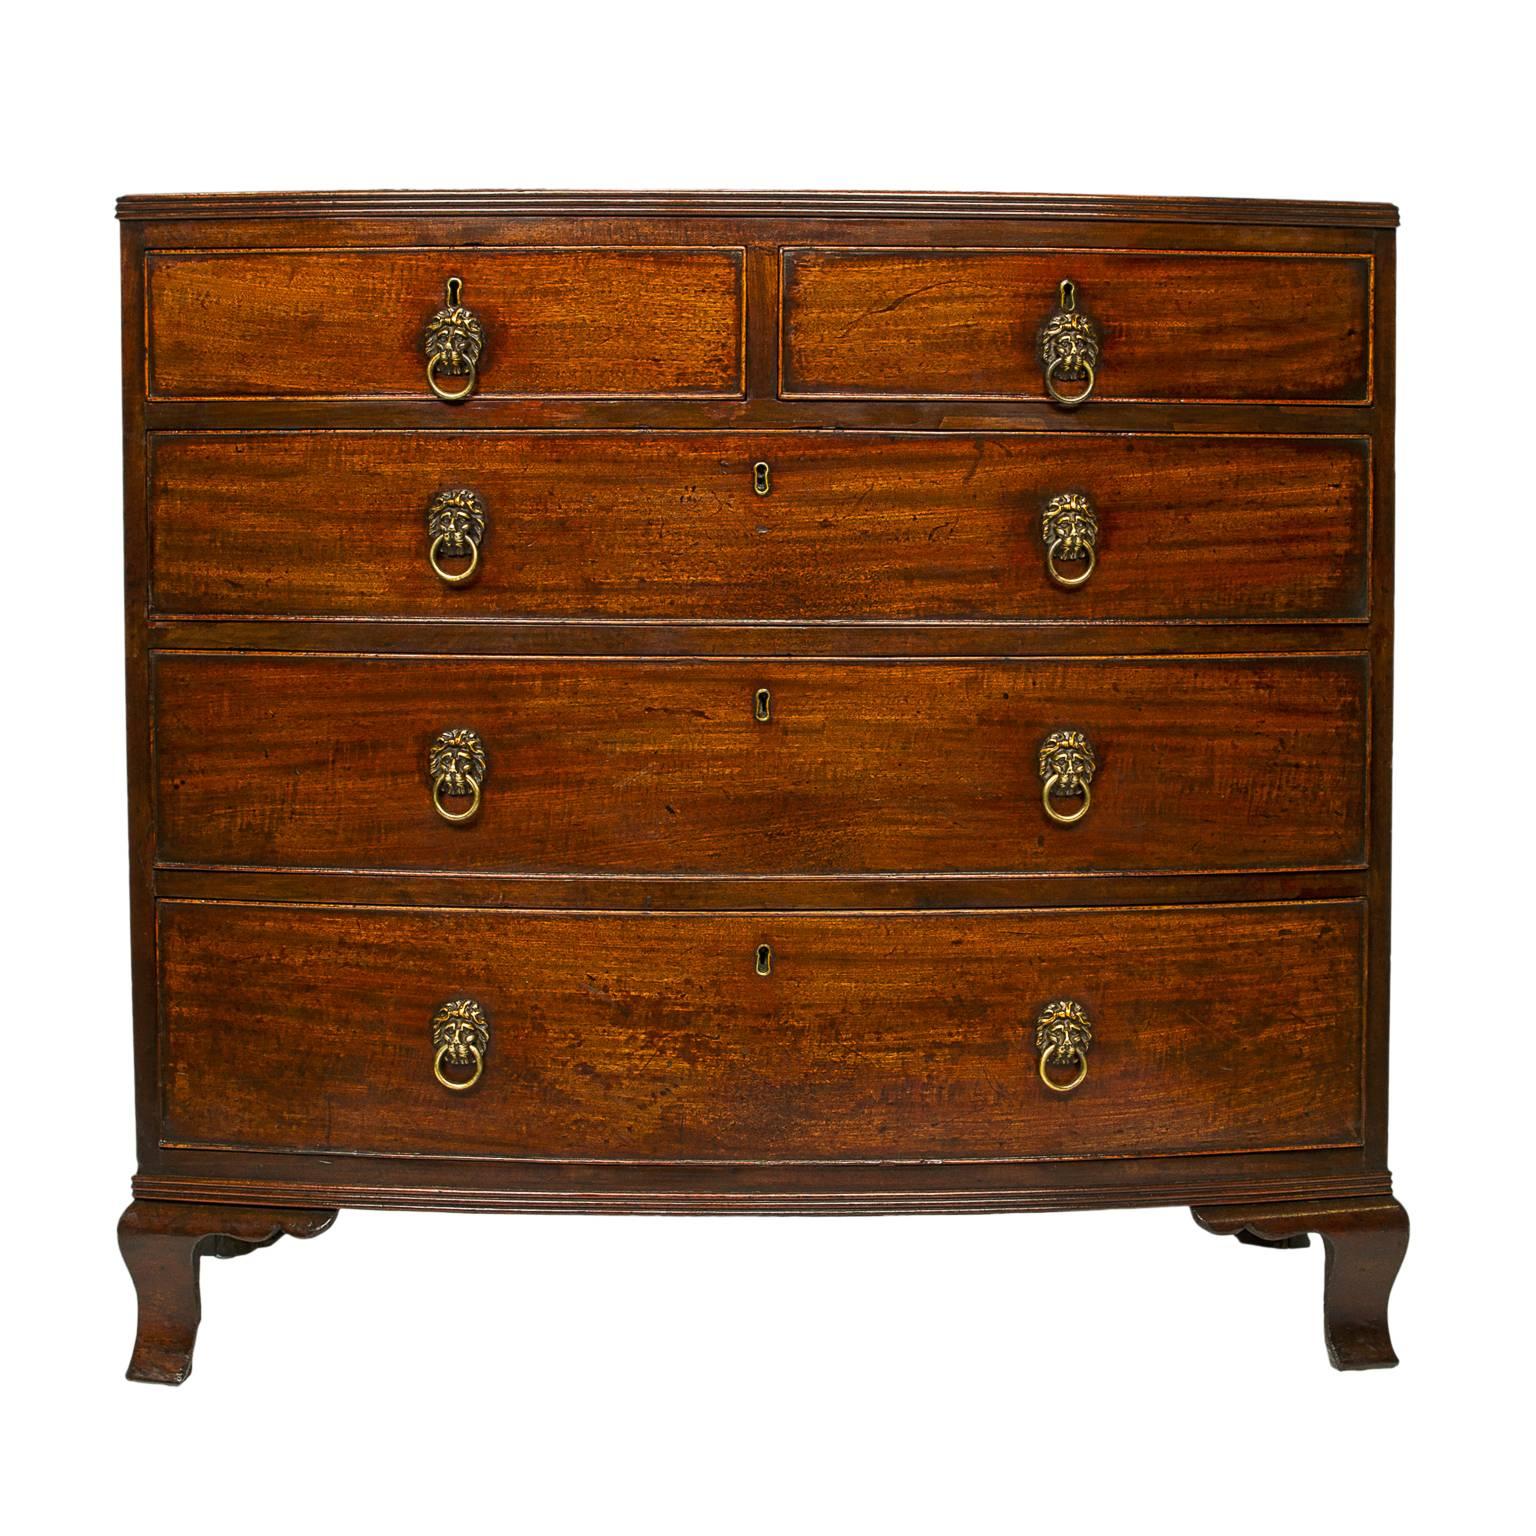 Georgian Mahogany Bow Front Chest of Drawers, circa 1780